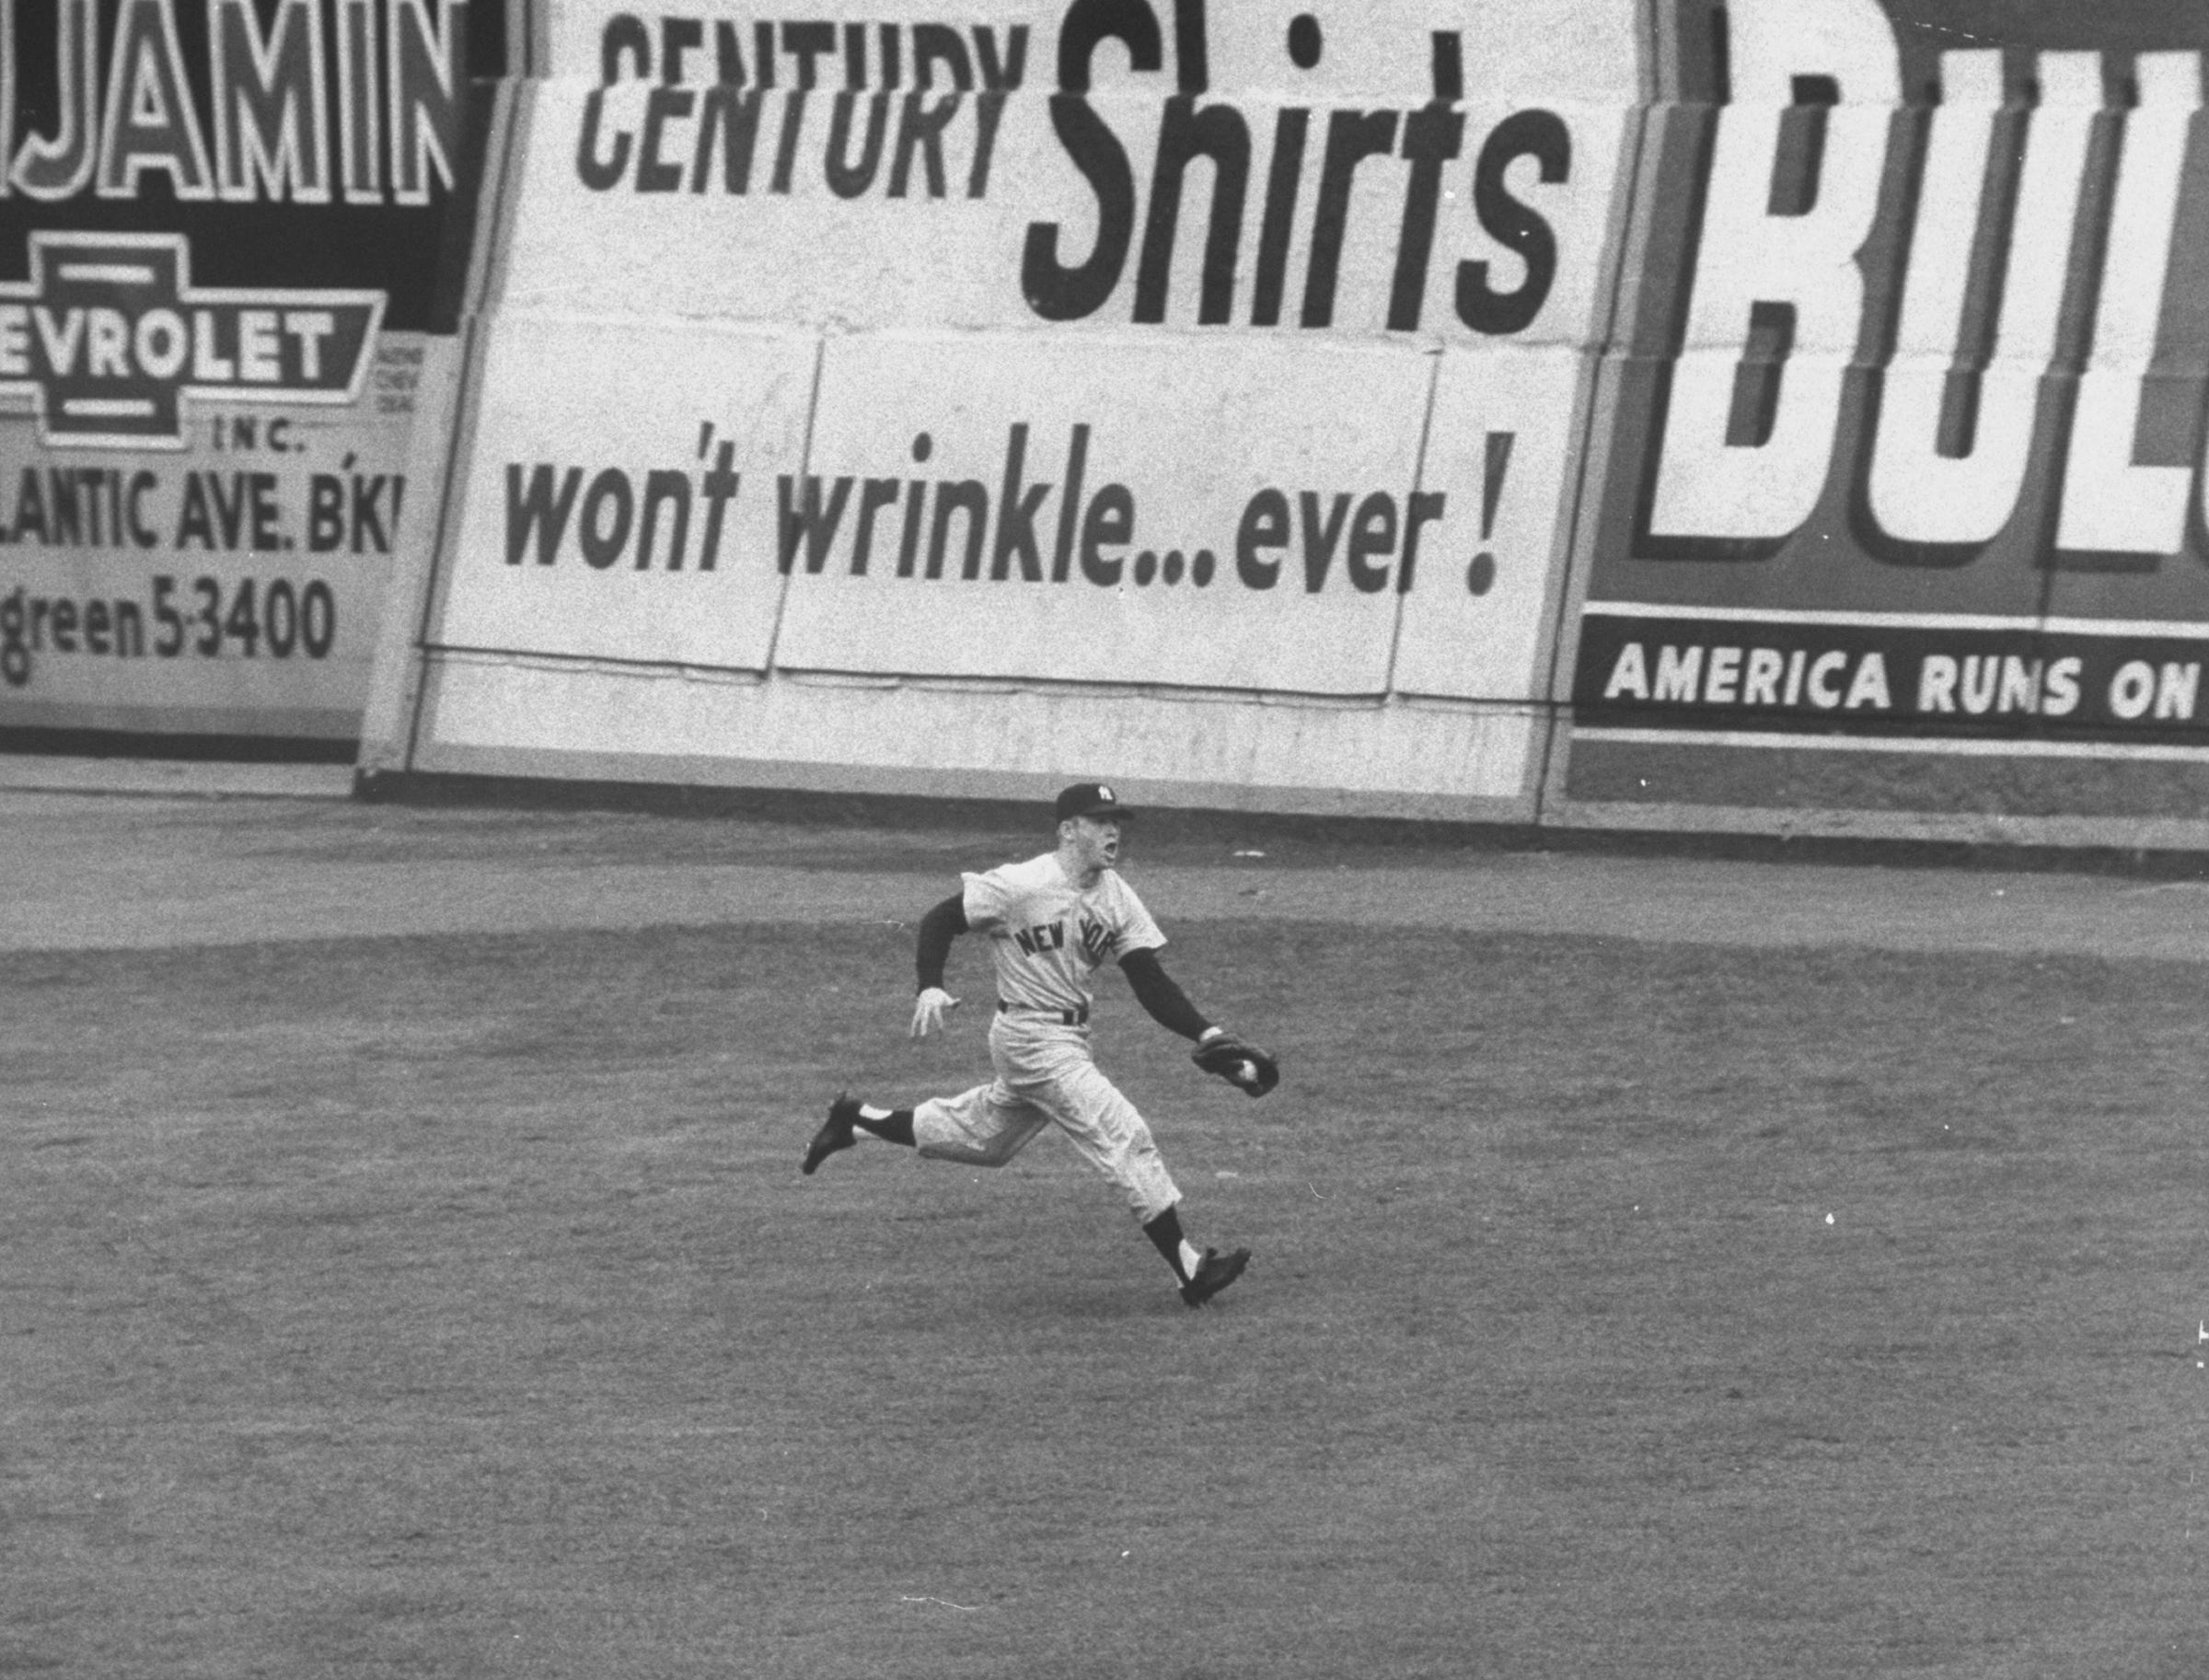 Mickey Mantle makes a running catch on a fly ball to left field during the 3rd game of the World Series at Ebbets Field in Brooklyn, NY on September 30, 1955.